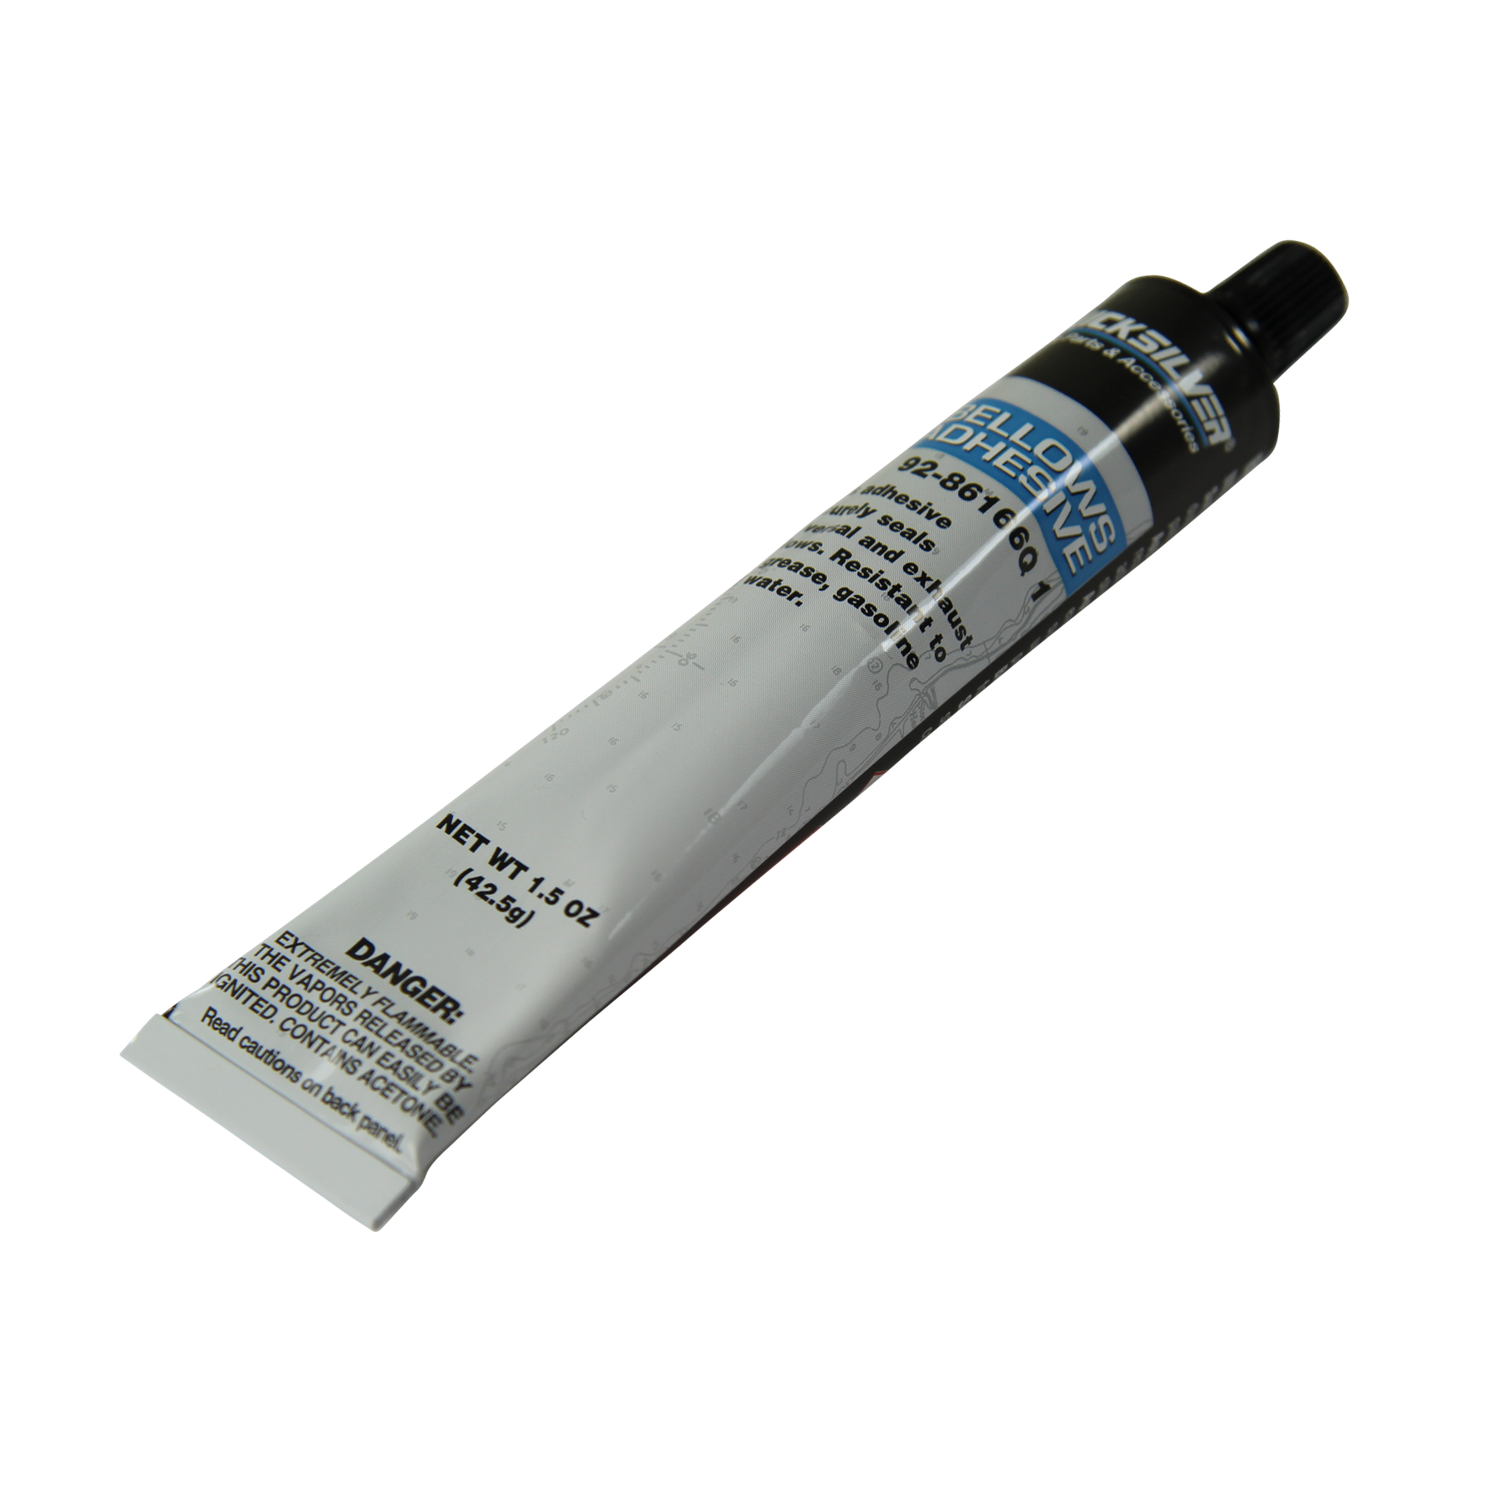 Bellows Adhesive Dichtmasse 42,5g